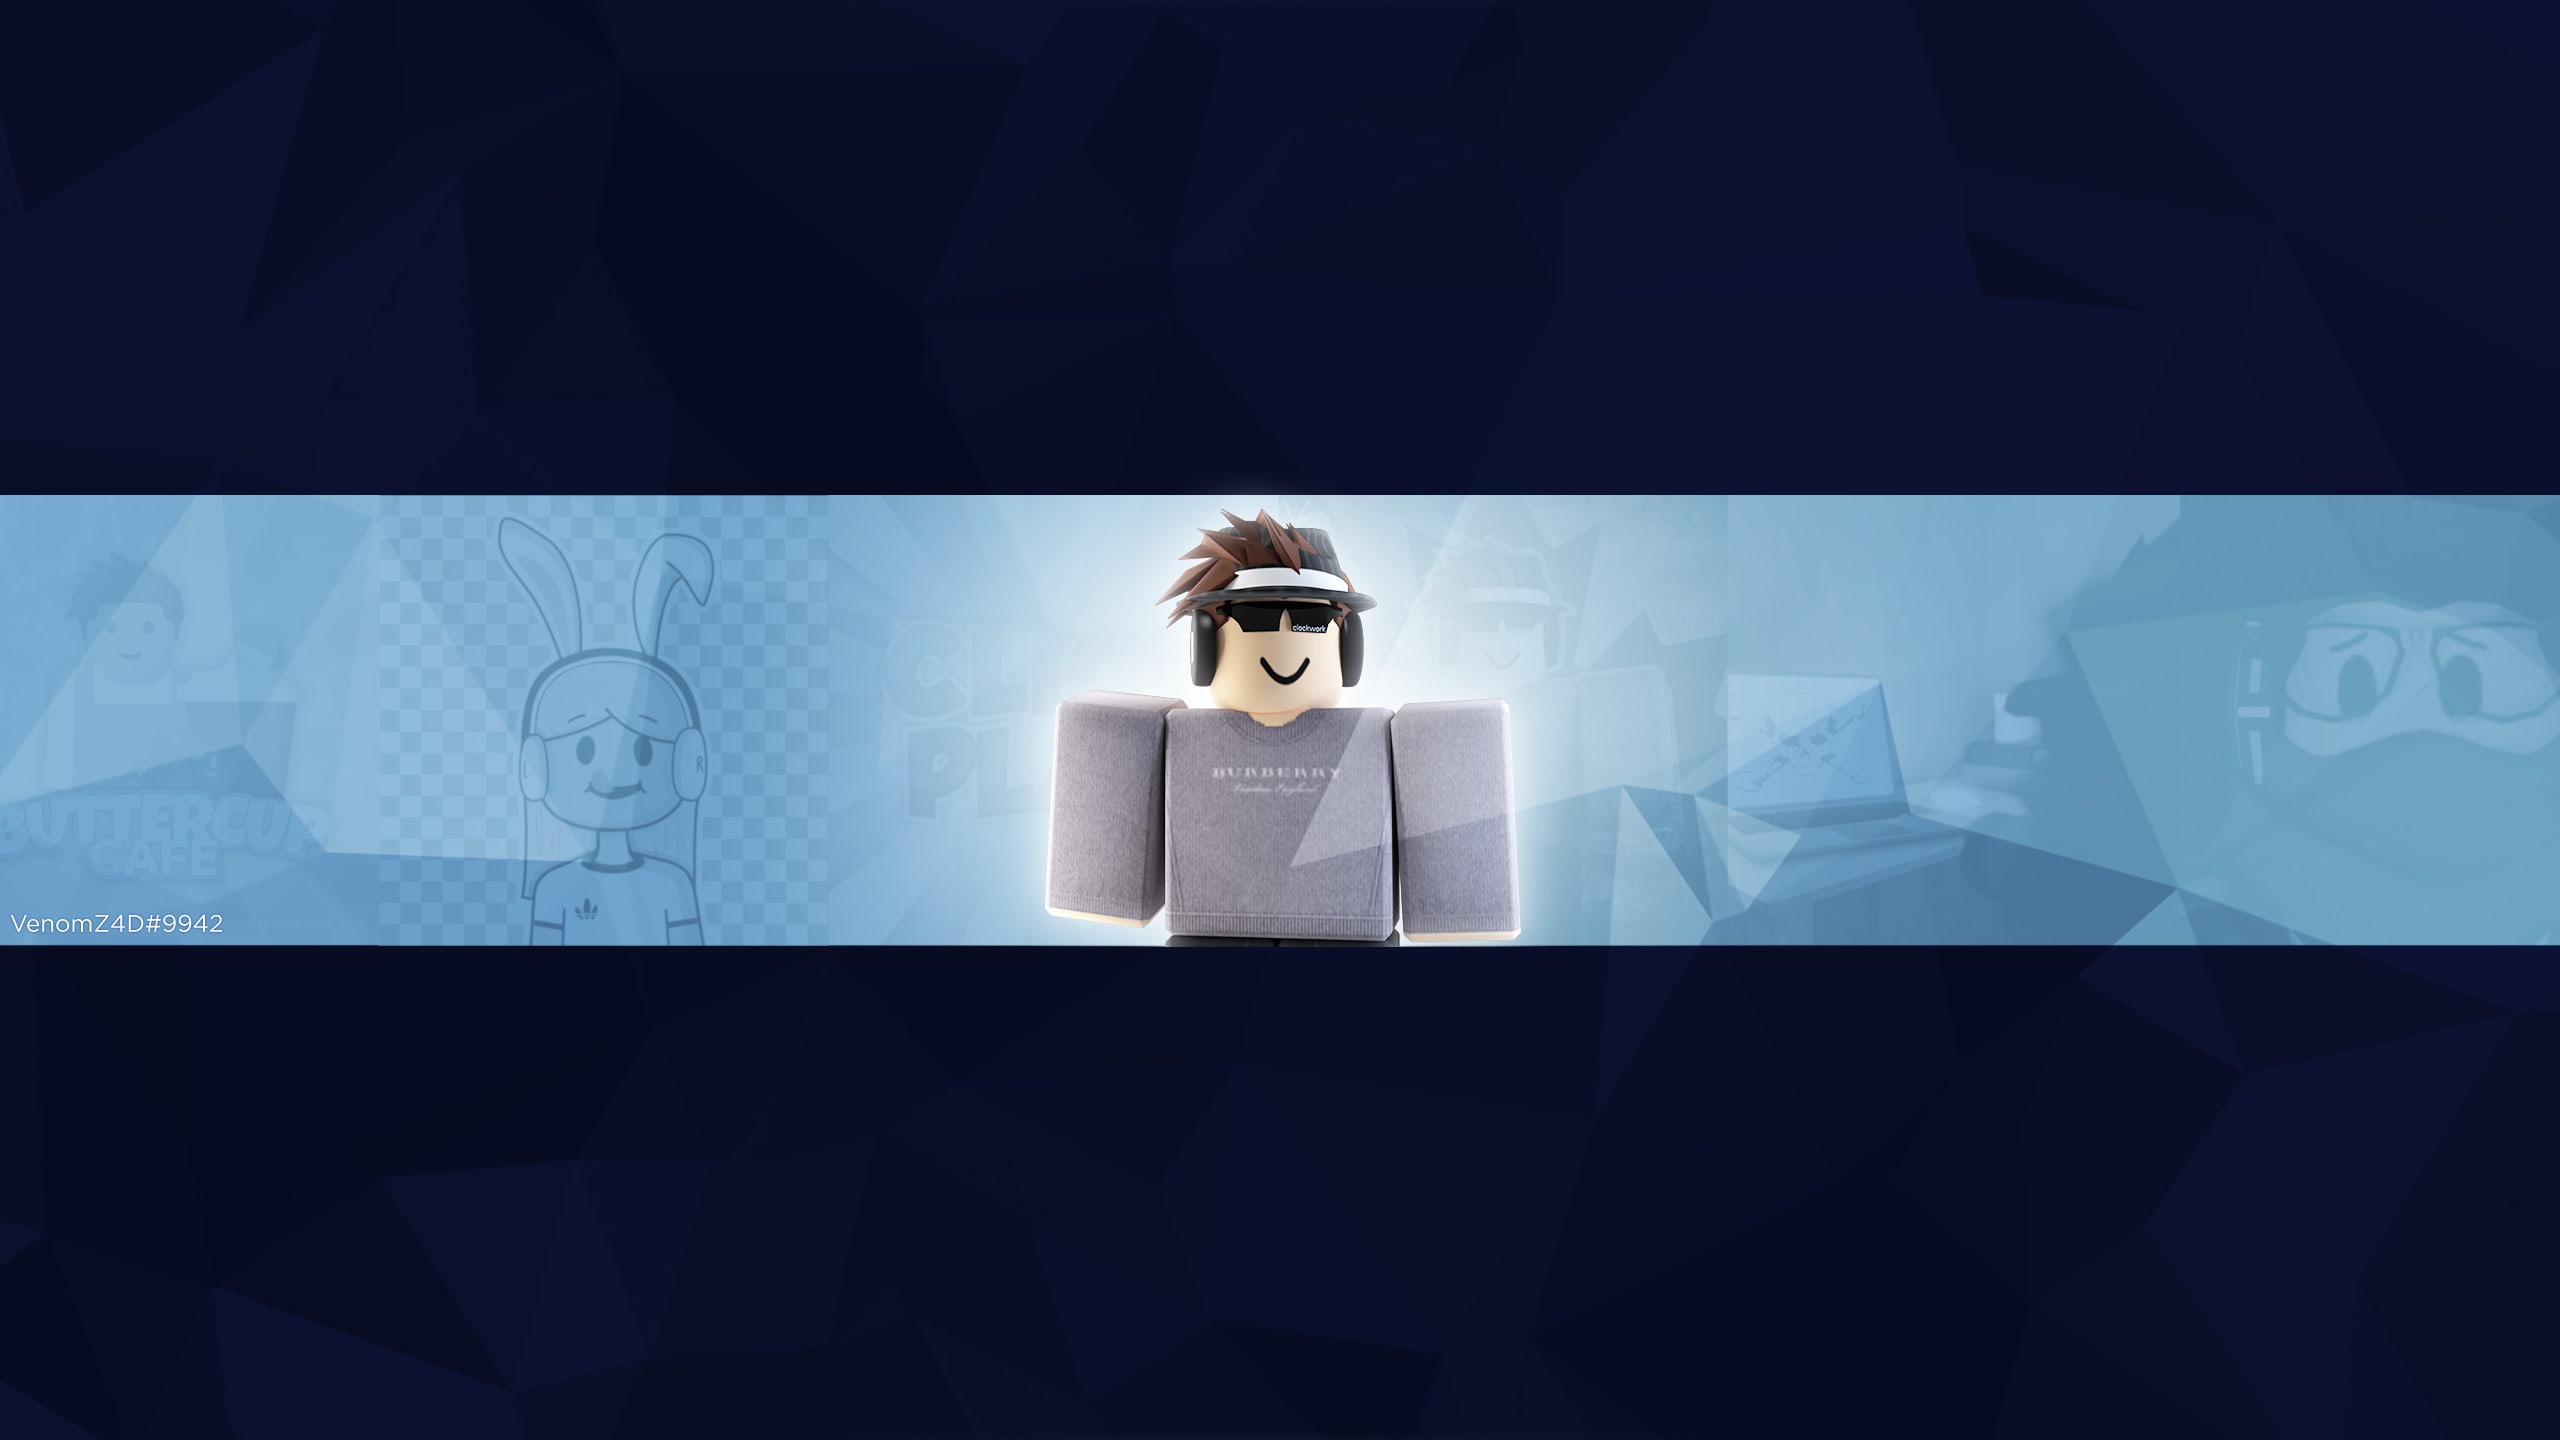 Render Your Roblox Avatar By Venomz4d Fiverr - roblox group icon background